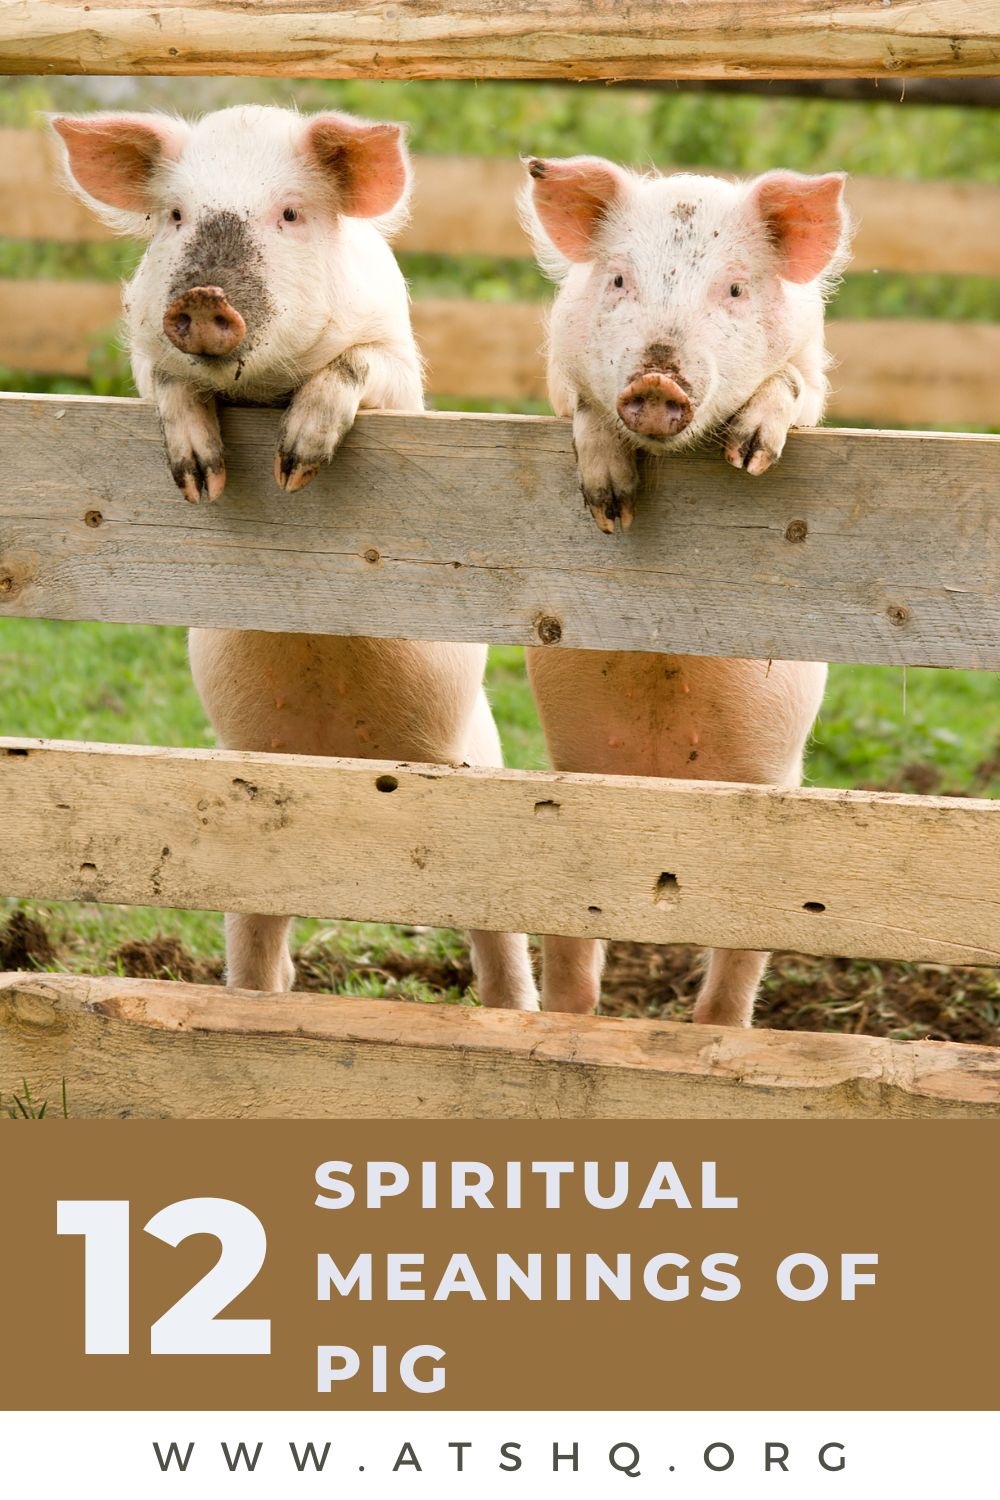 12 Spiritual Meanings of Pig